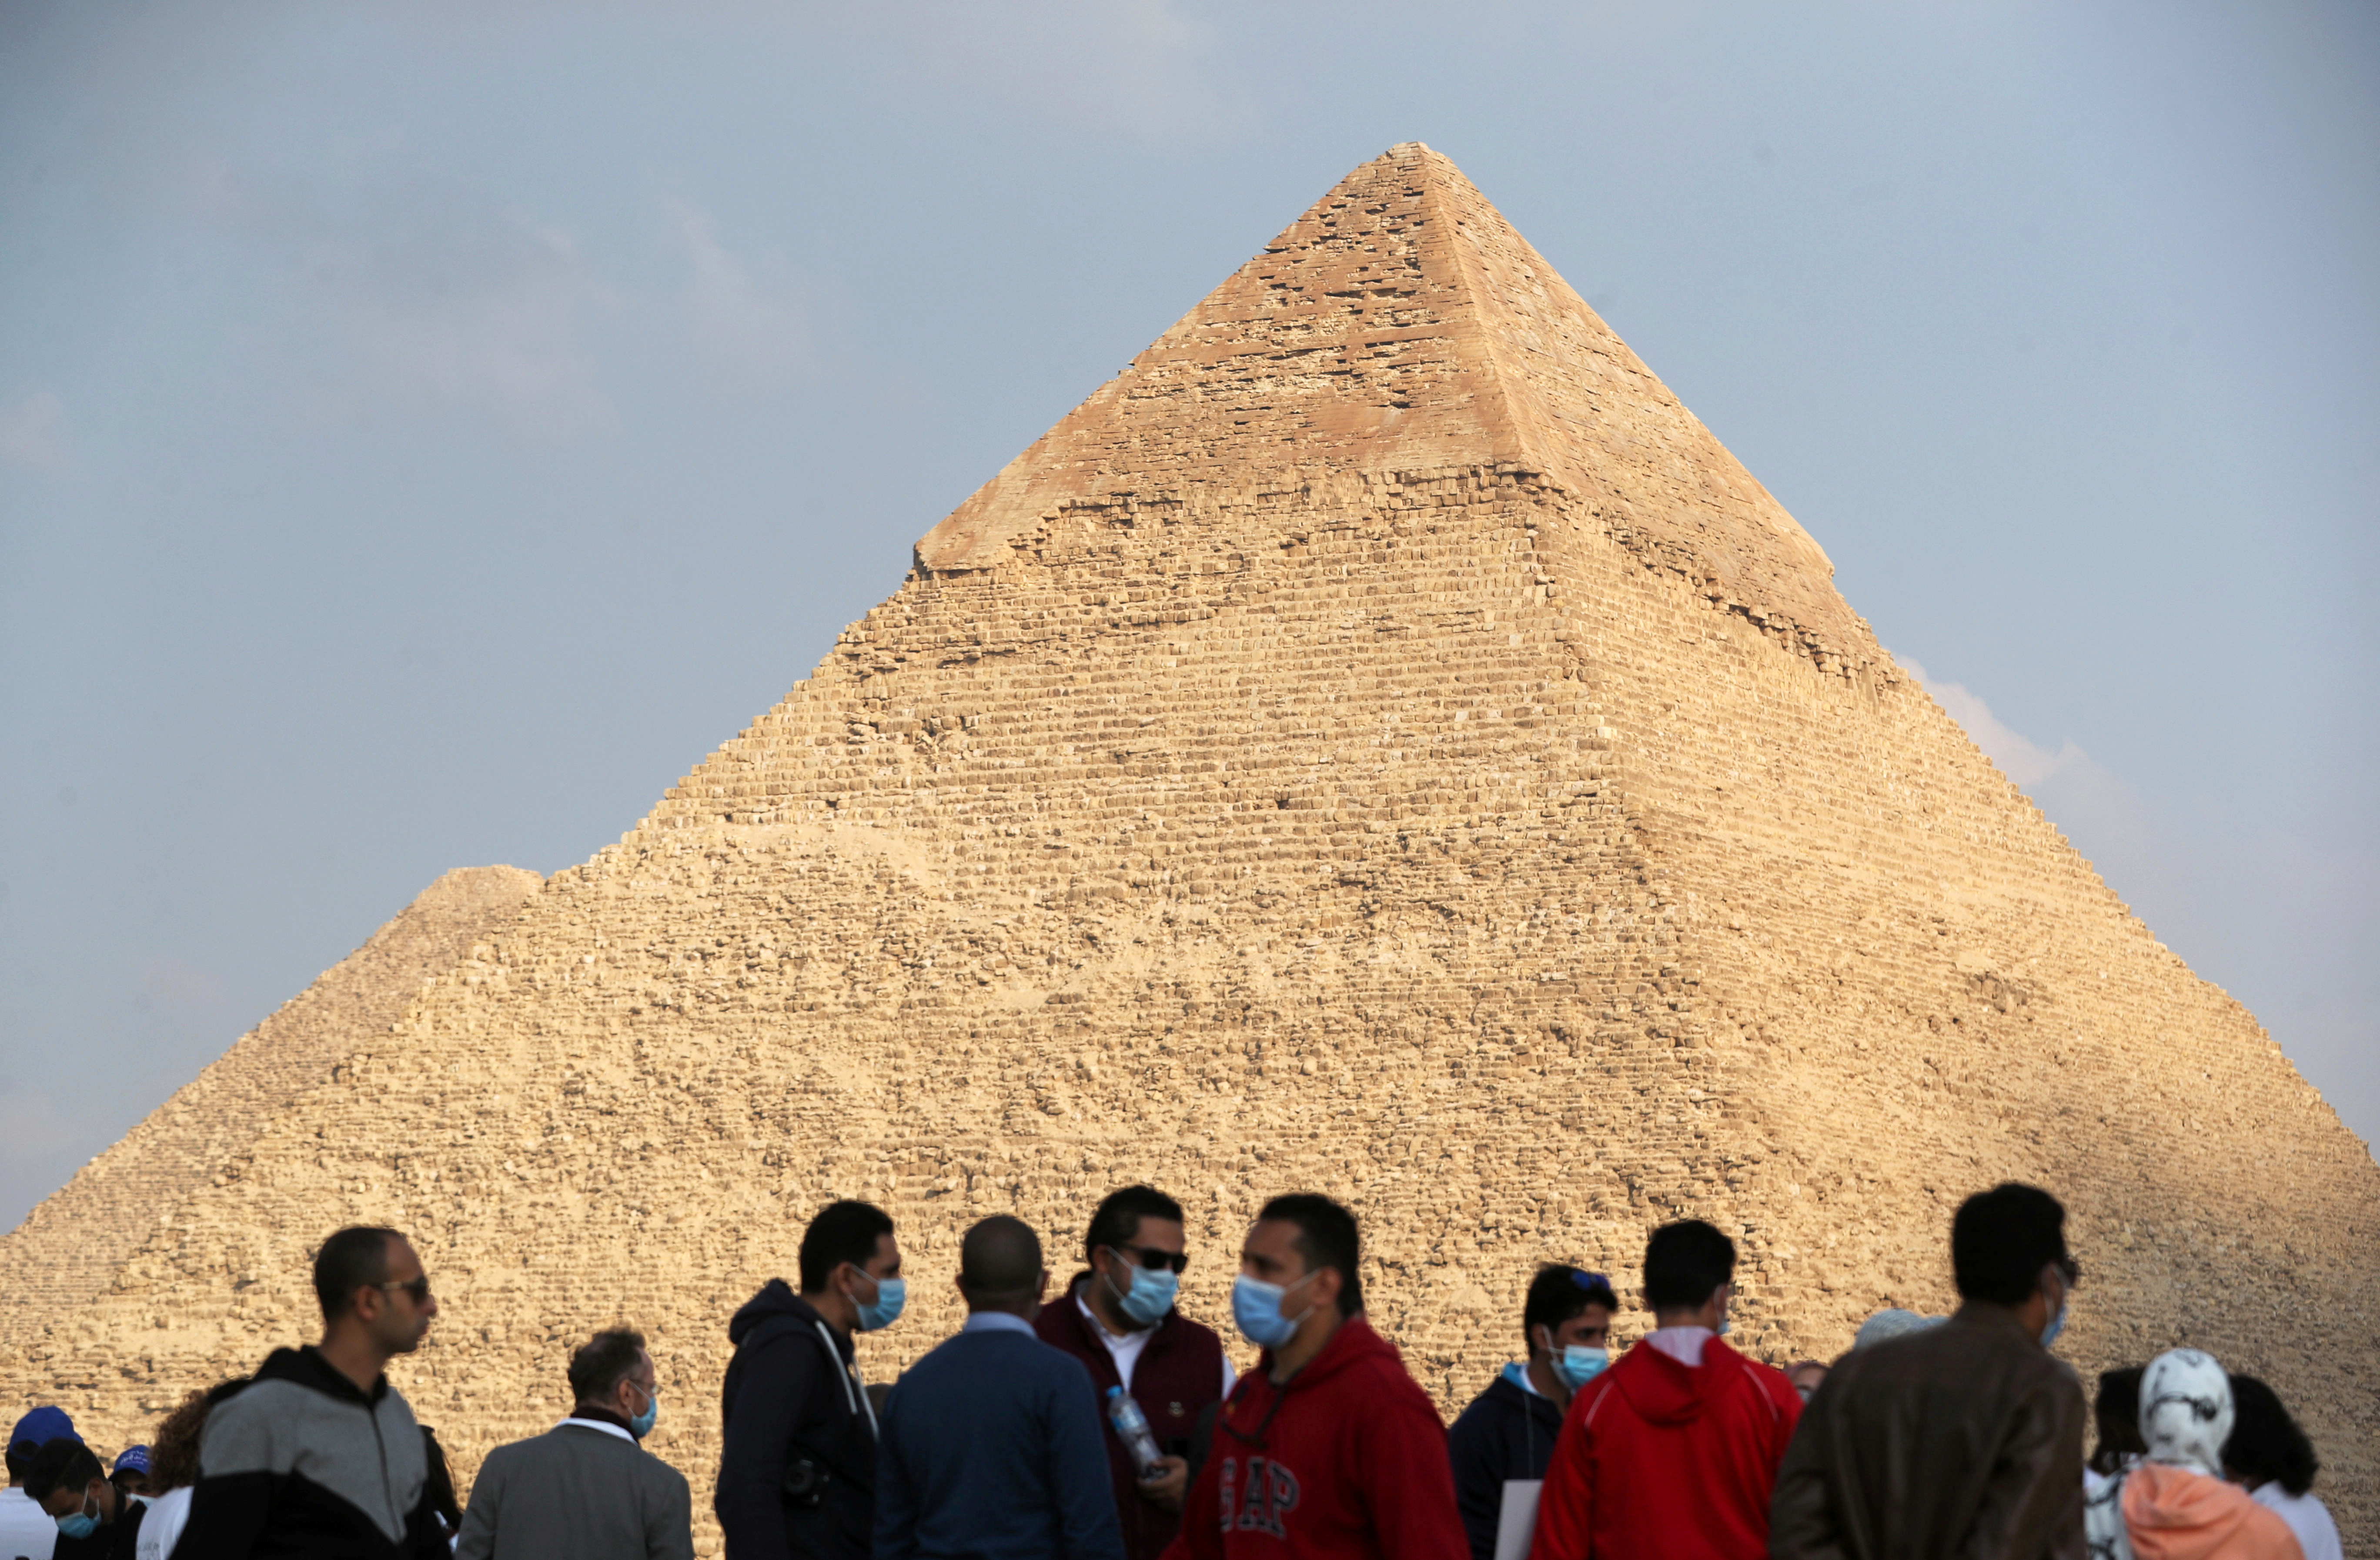 Visitors gather at the Great Pyramids of Giza in Giza, Egypt December 18, 2020. REUTERS/Mohamed Abd El Ghany